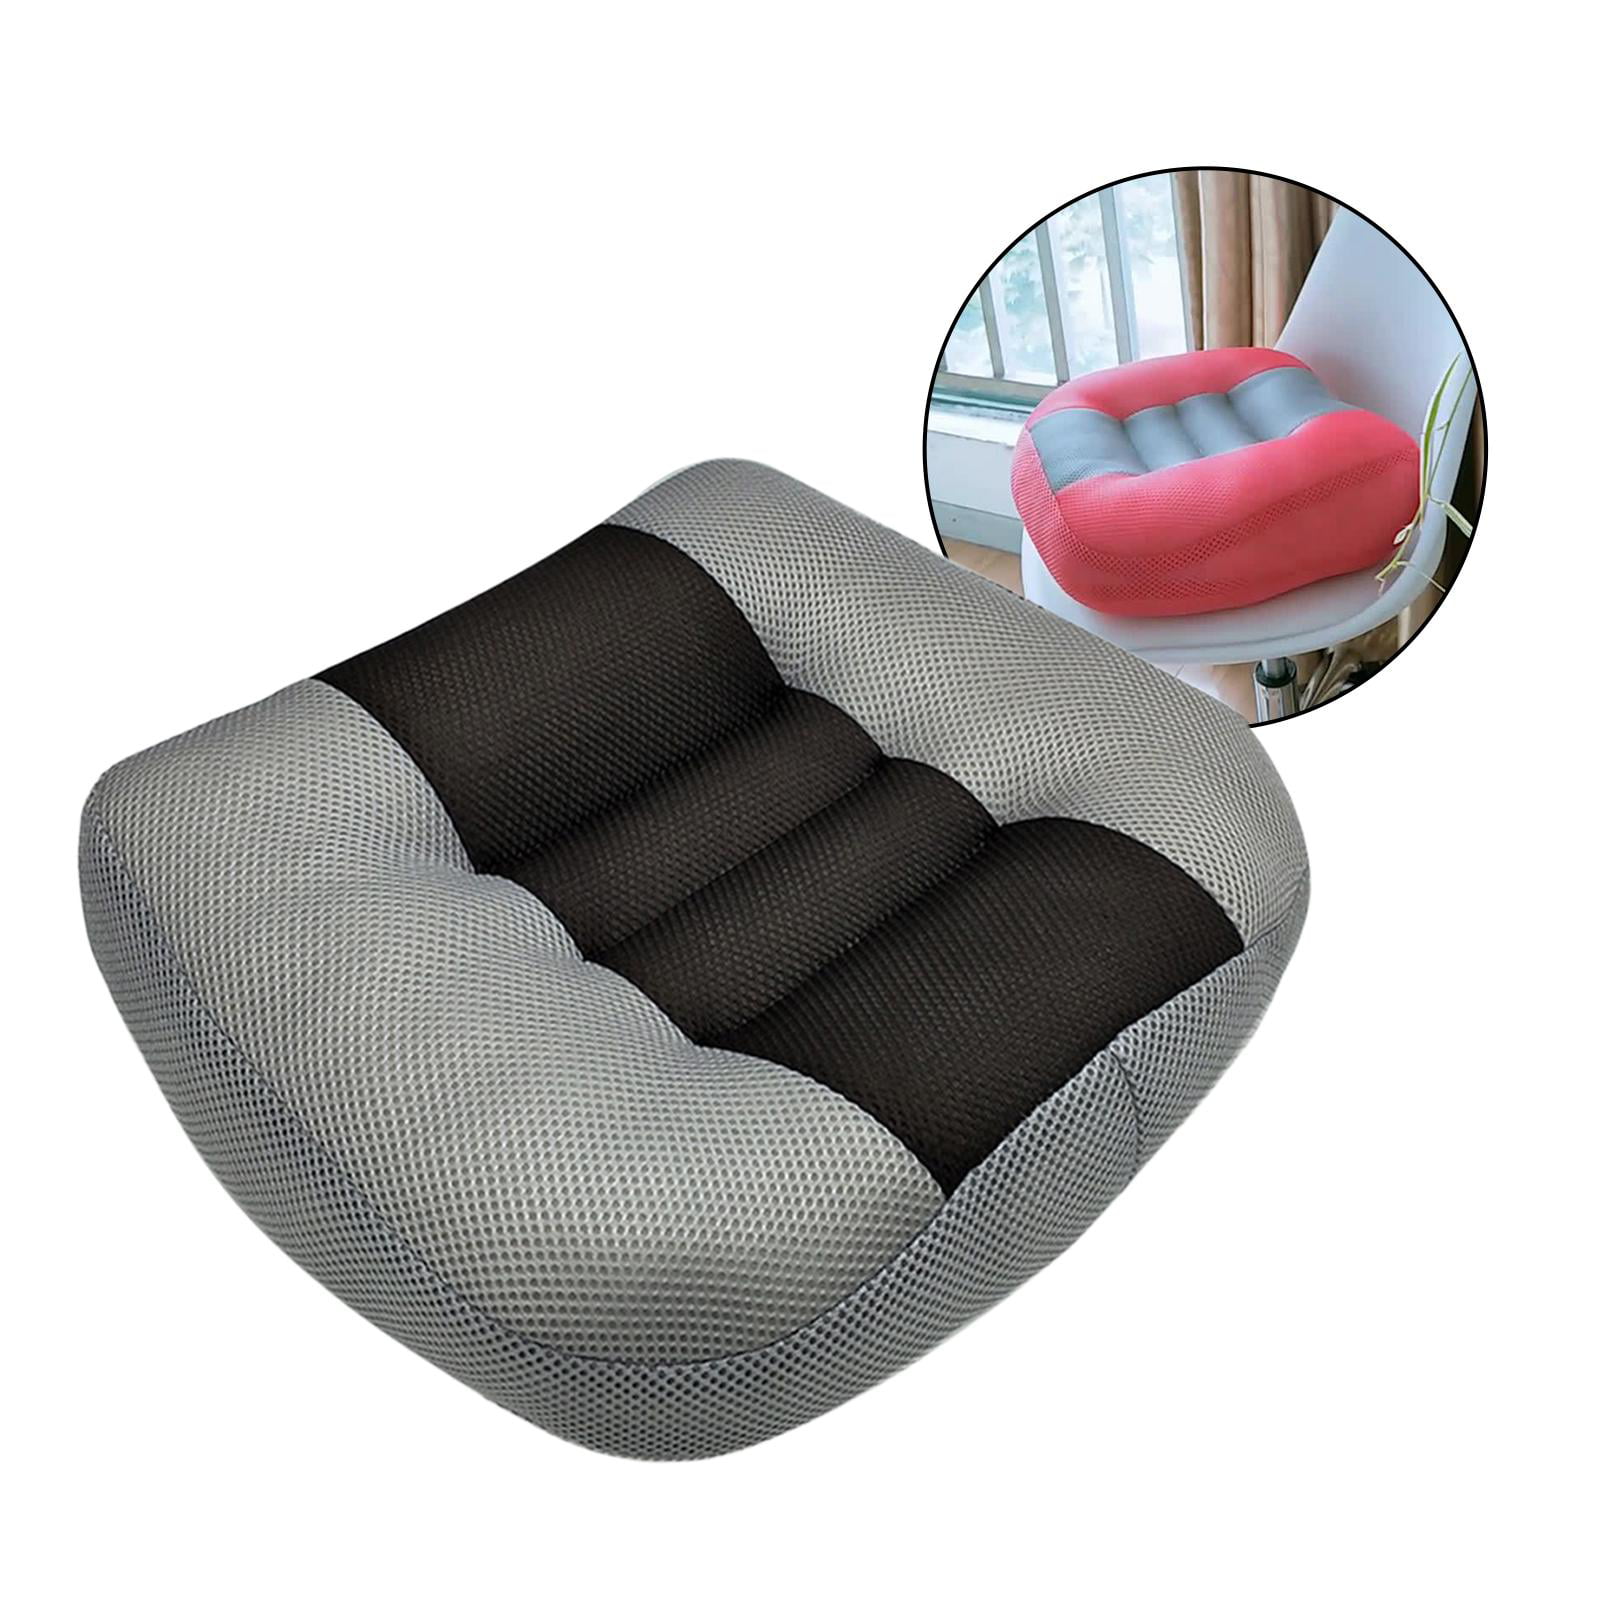 TMXK Car Booster Seat Cushion Posture Portable Breathable Mesh/Plush,  Effectively Increase The Field of View by 10cm/ 4in, Ideal for Office,  Home